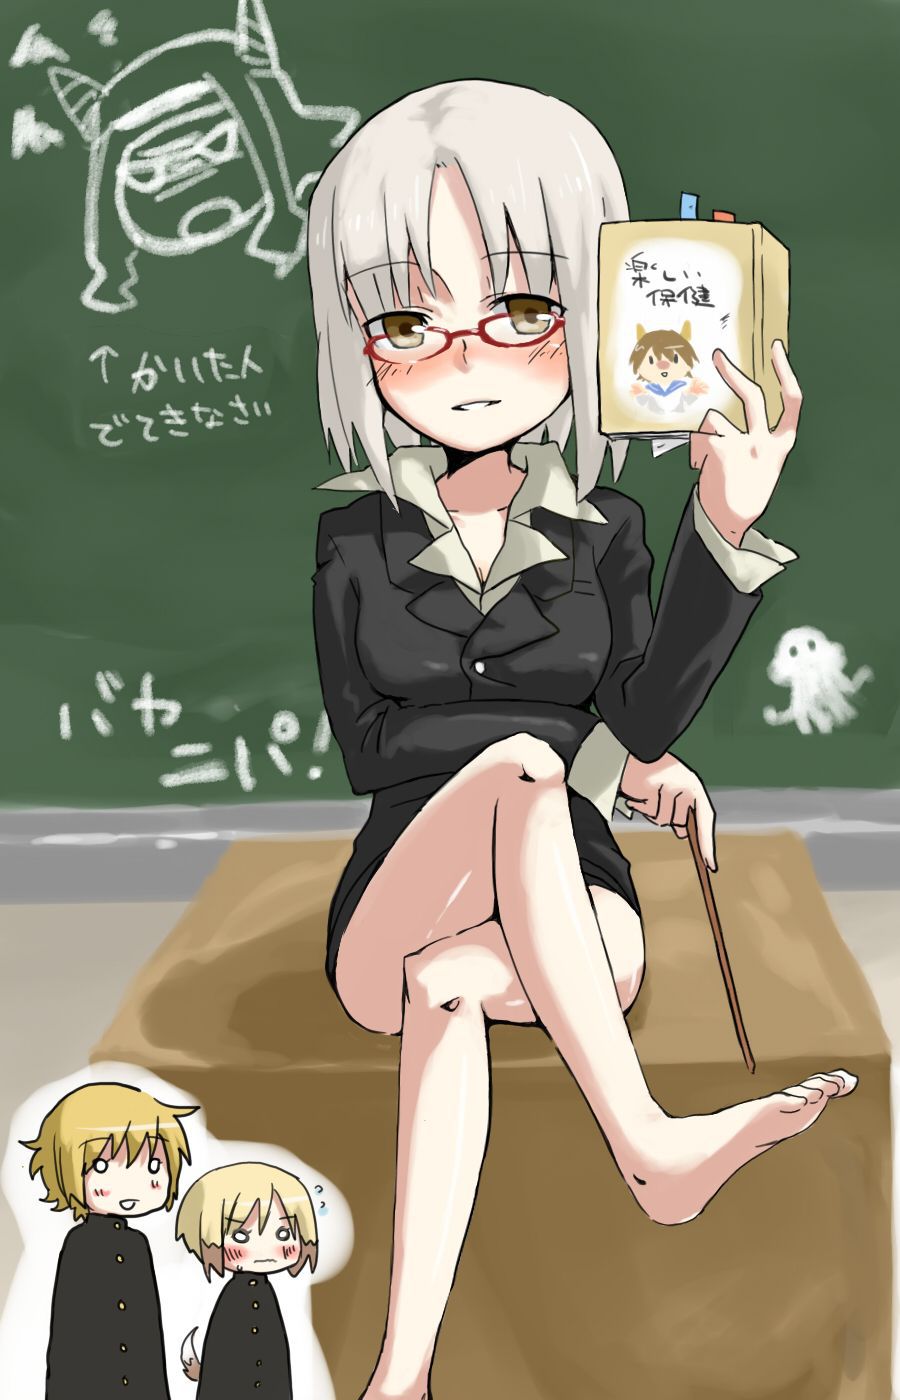 [Secondary, ZIP] summary image of Edith Grossman Sensei wanting sexual guidance "brave wit cheese." 22